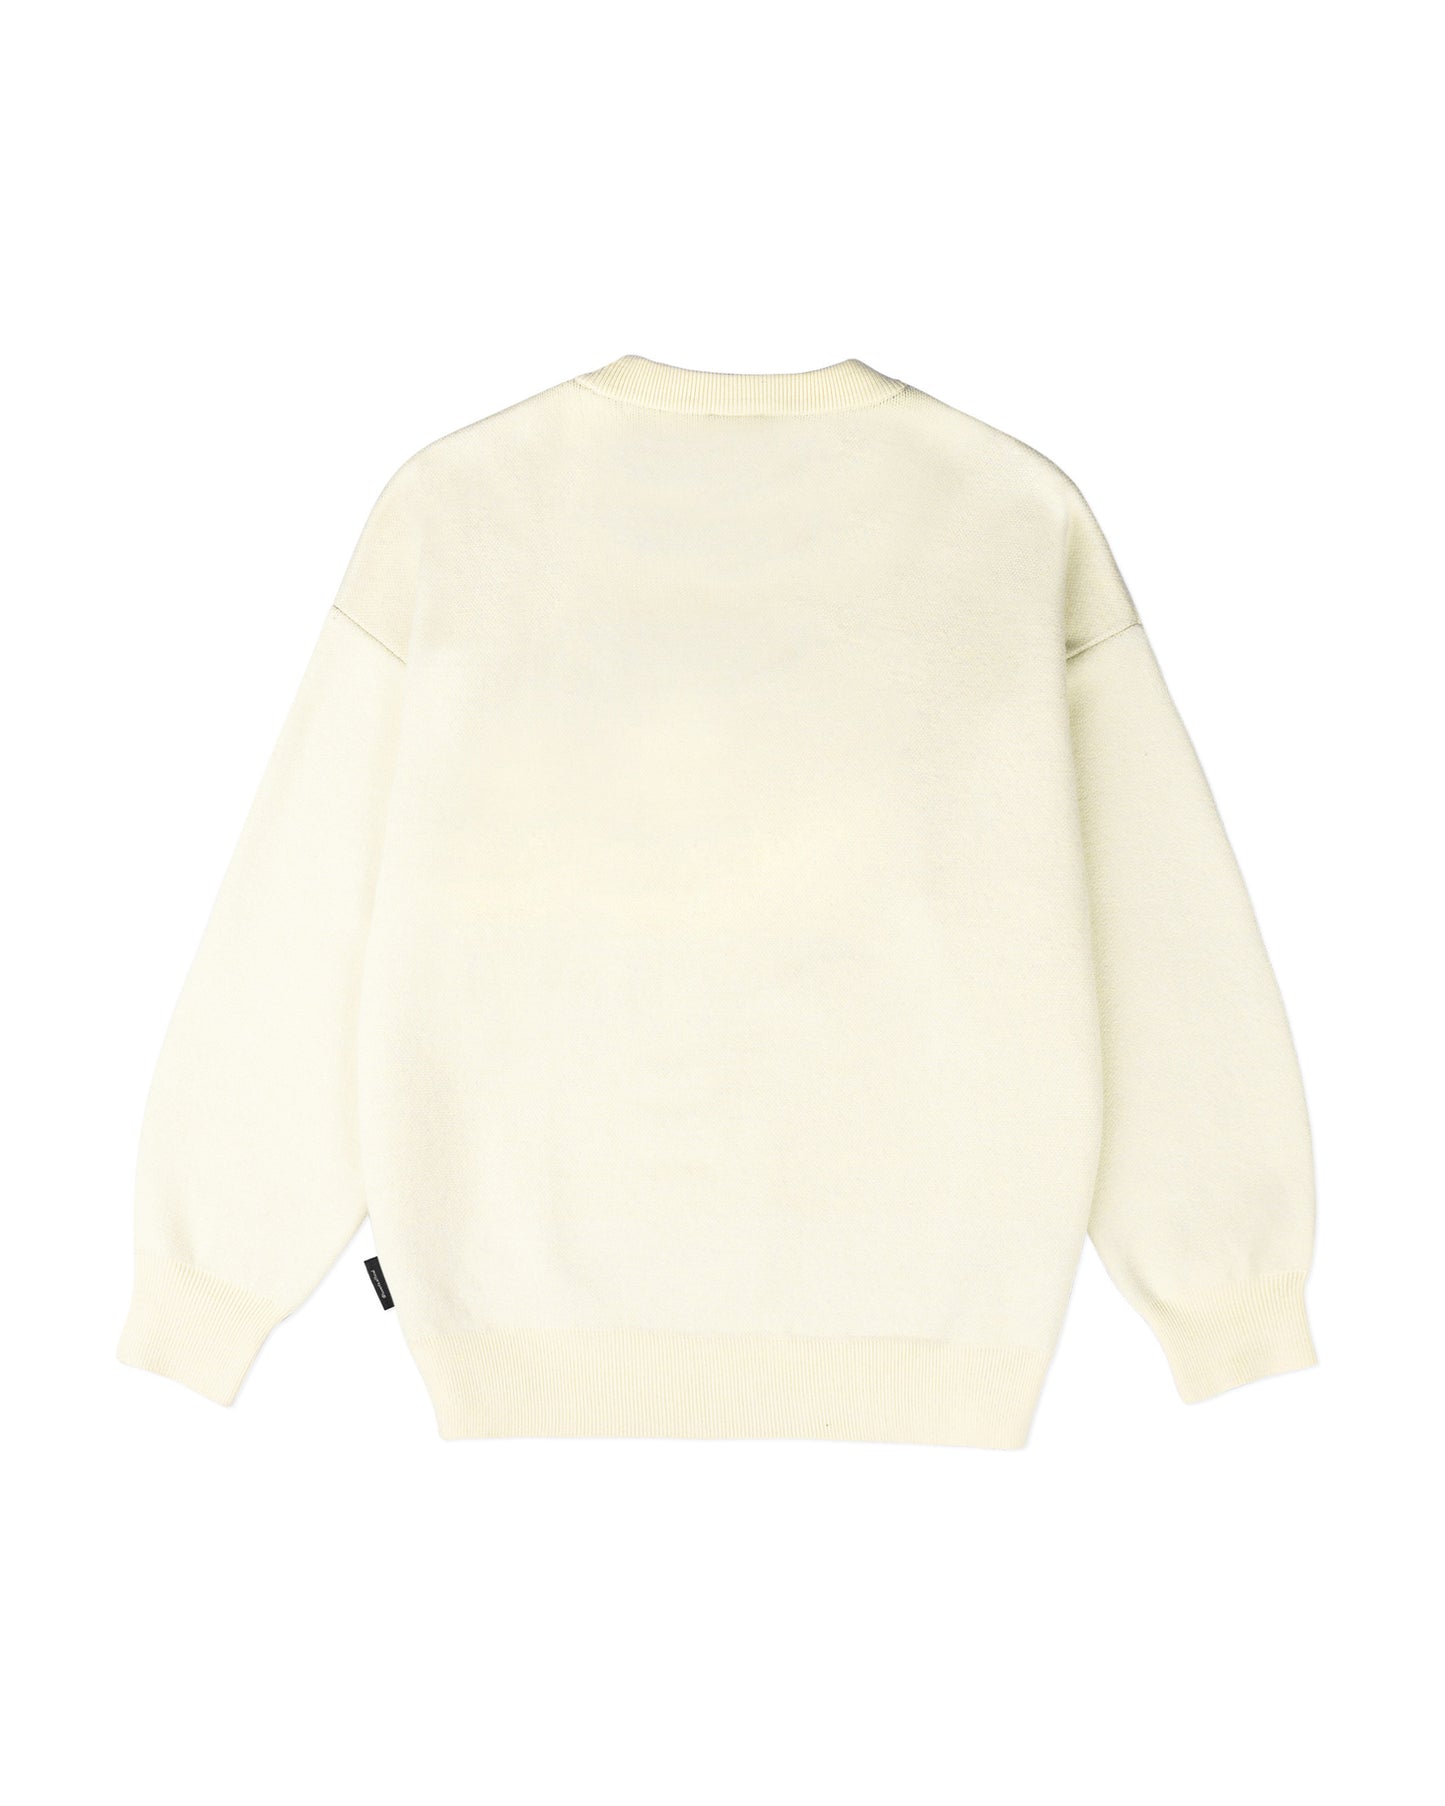 Levents® "My Animals" Series Panther Knit Sweater/ Cream